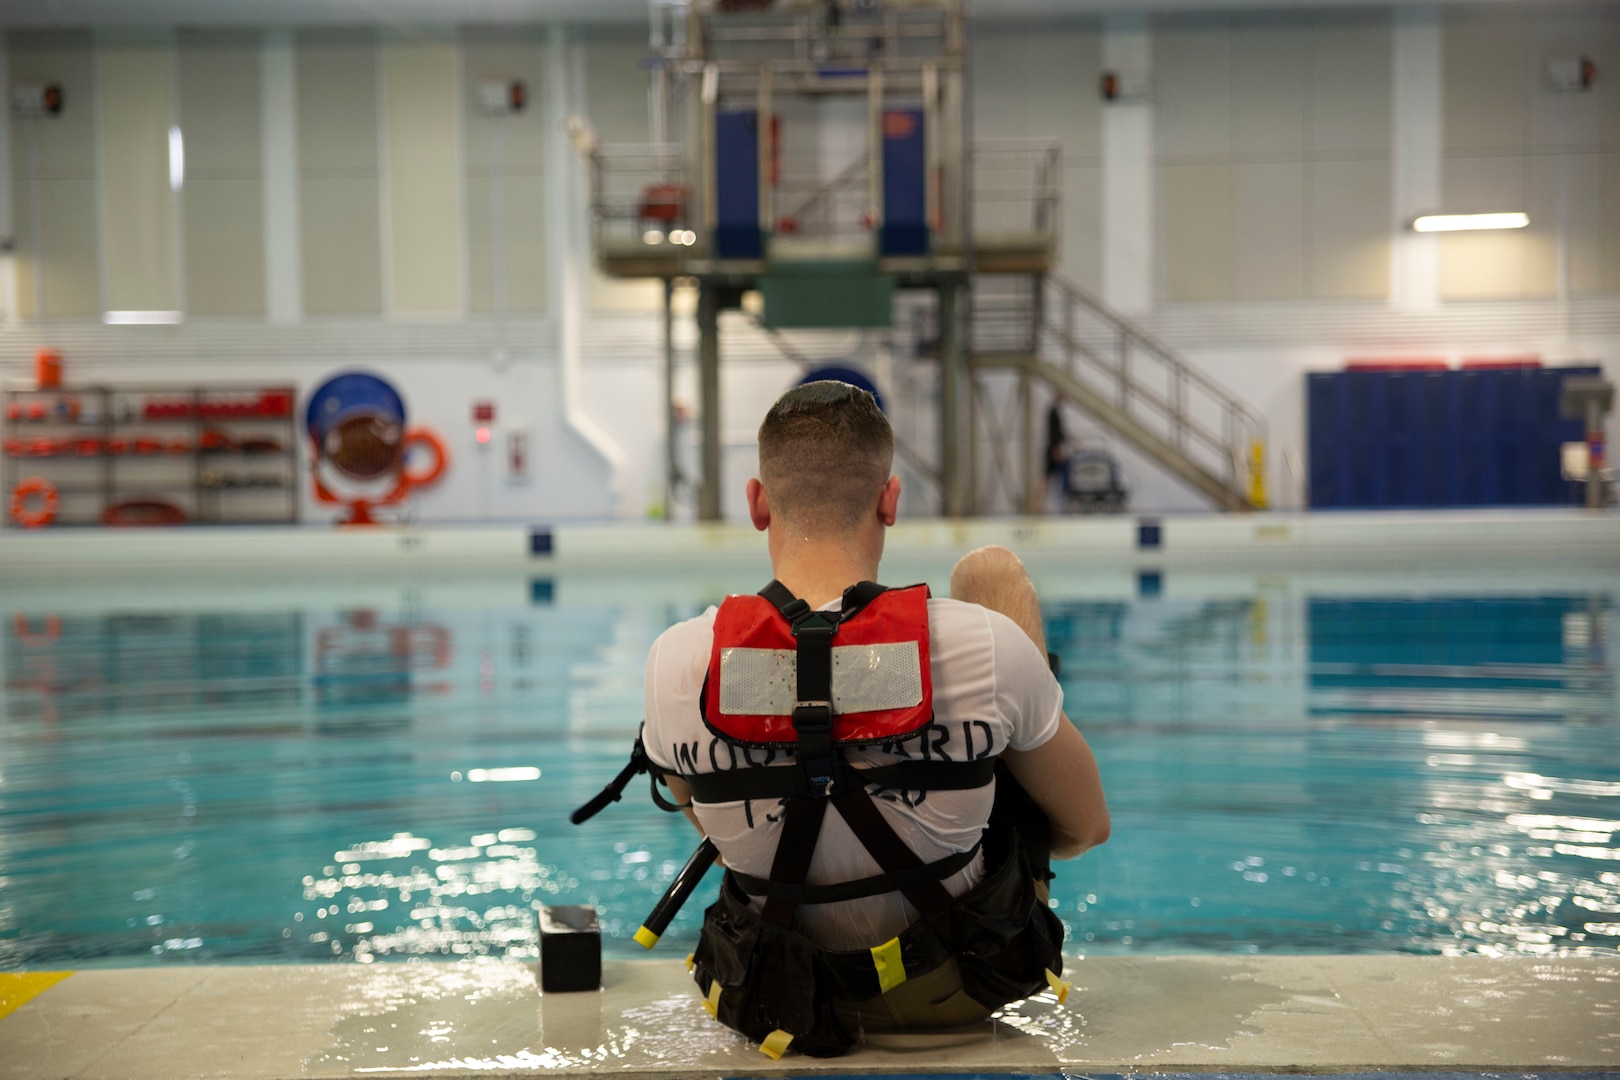 A prospective Coast Guard rescue swimmer sits at the edge of a training pool with their back to the camera